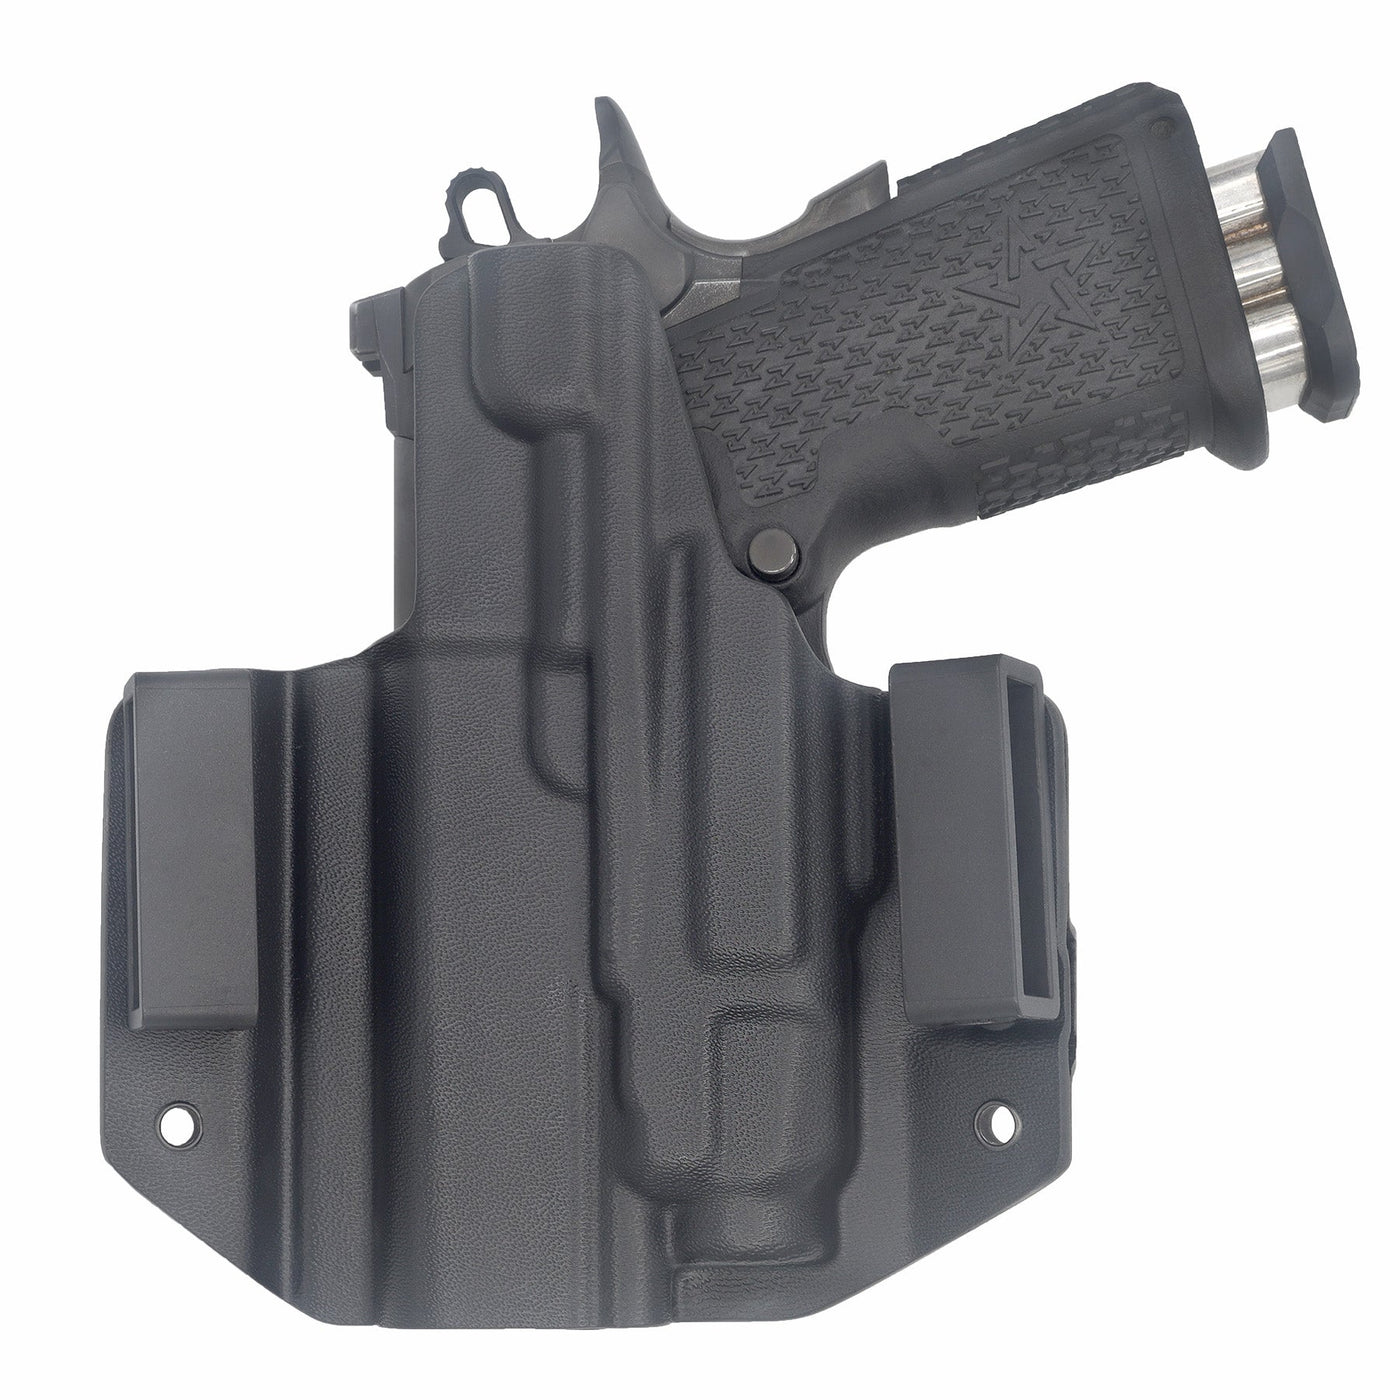 C&G Holsters custom OWB Tactical 1911 DS Prodigy Streamlight TLR7/a in holstered position back view